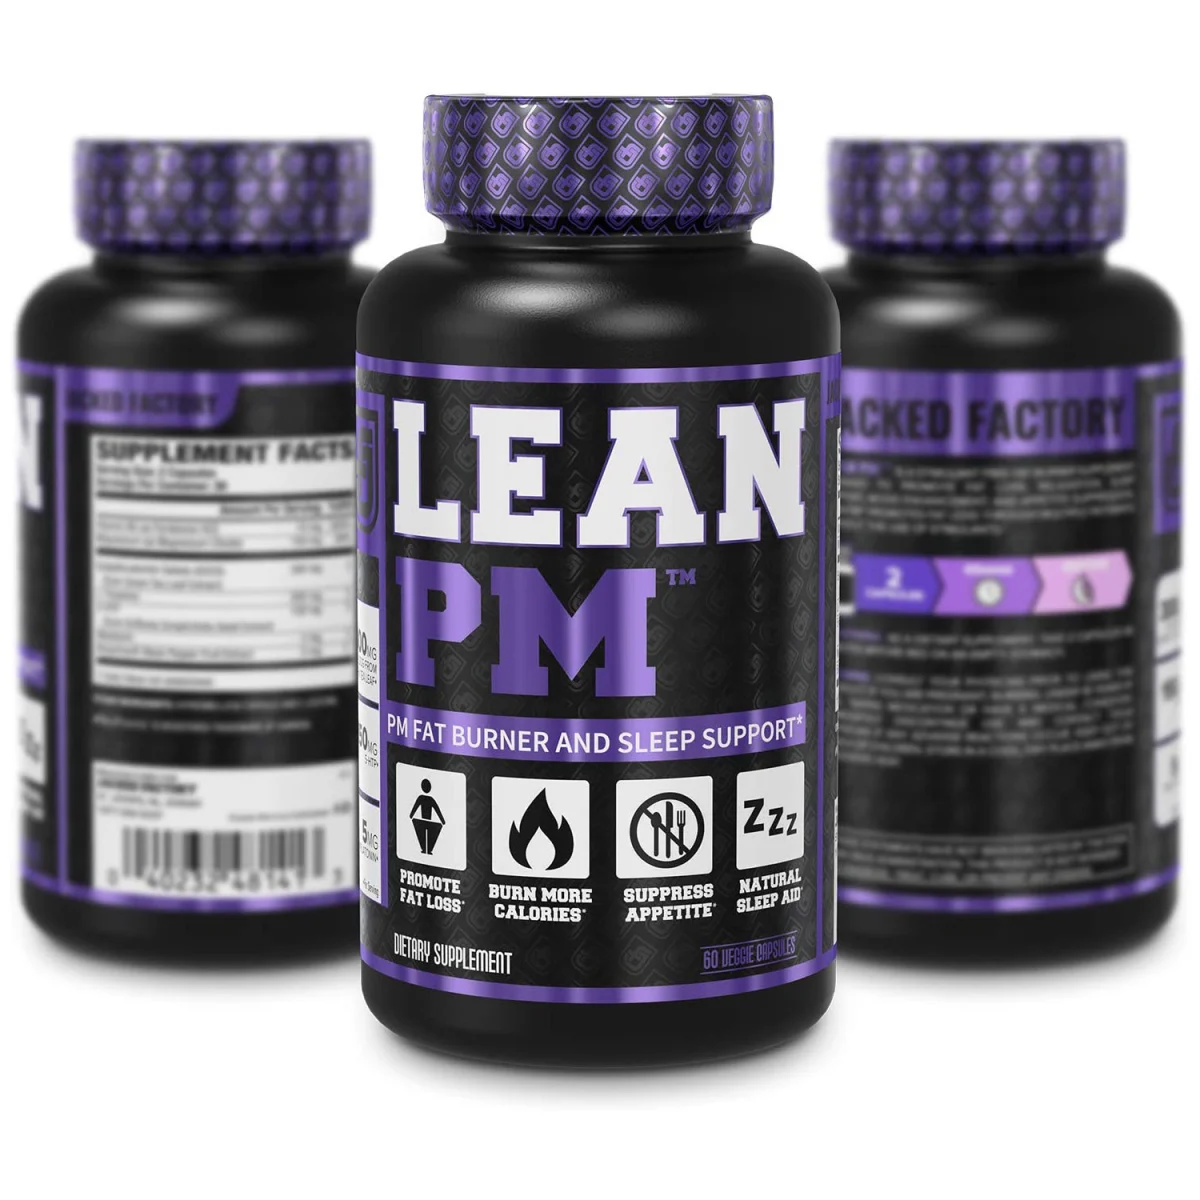 Lean PM Weight Loss Supplement